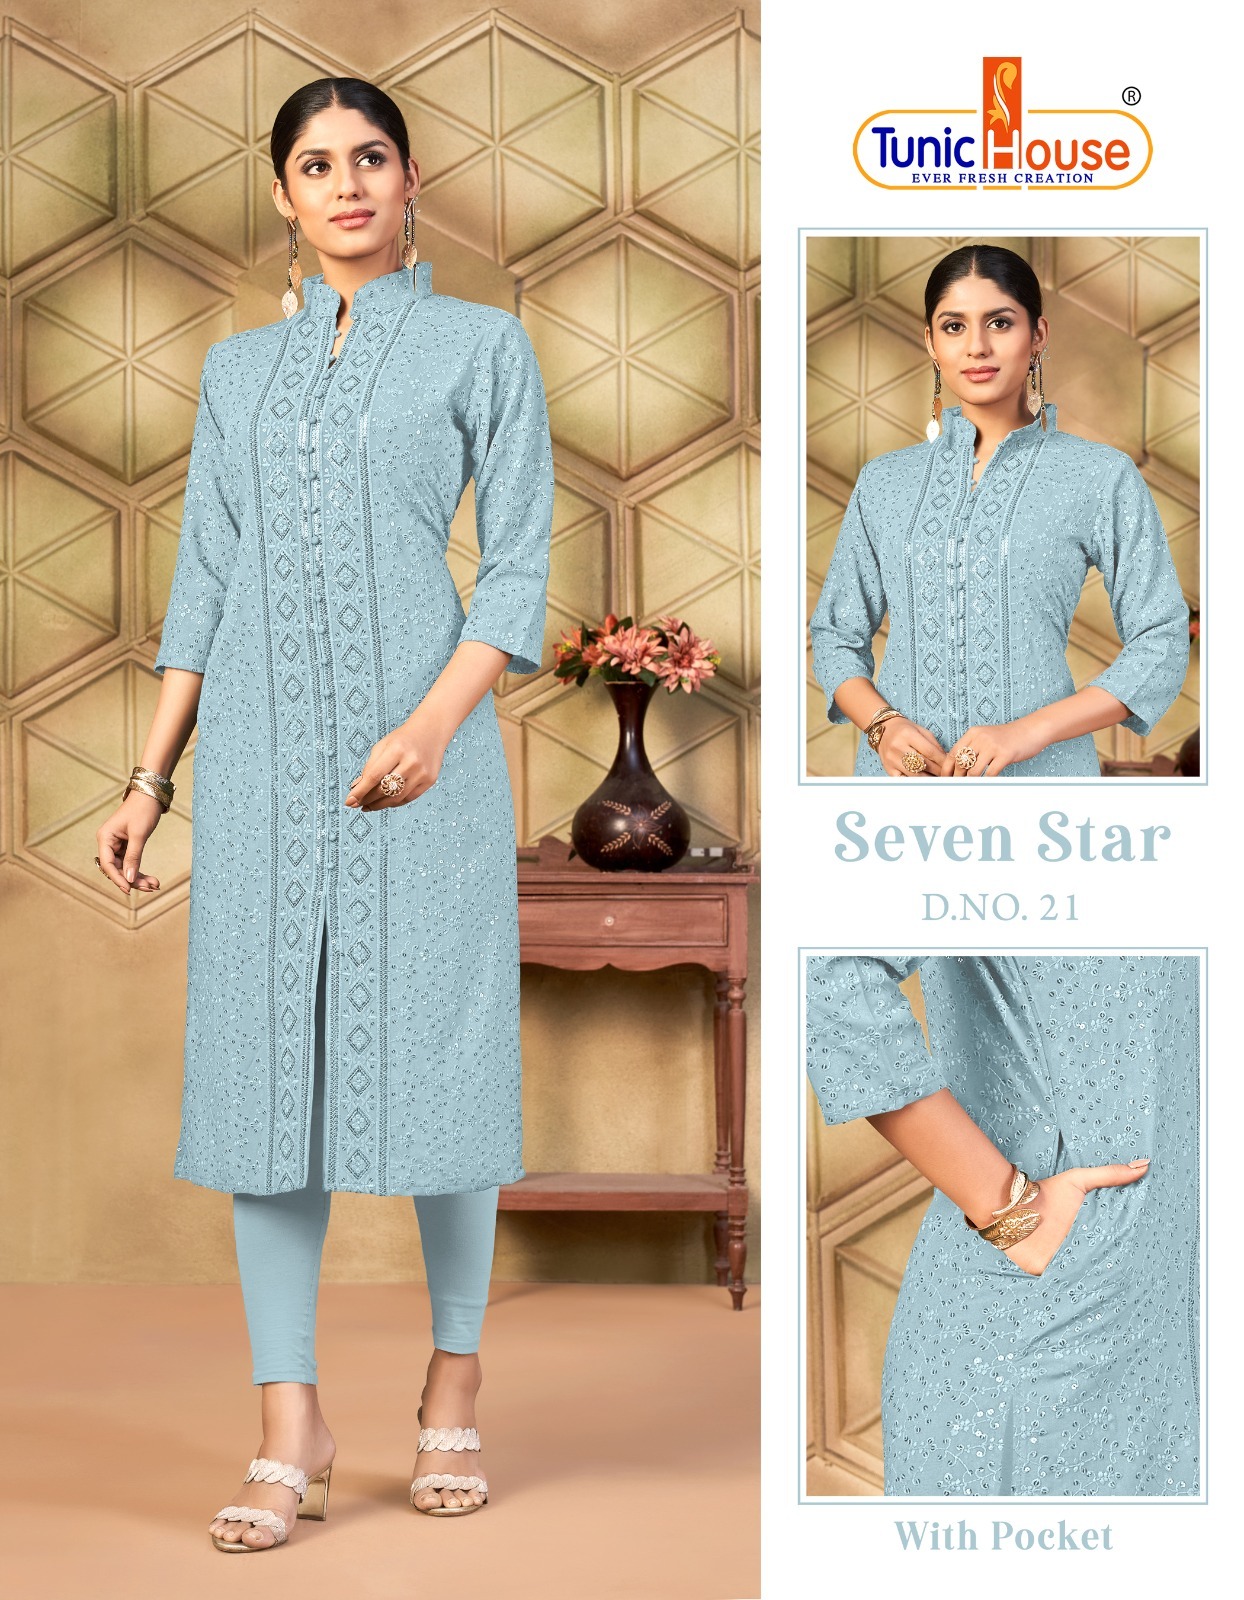 Tunic Houes 7 Star collection 4